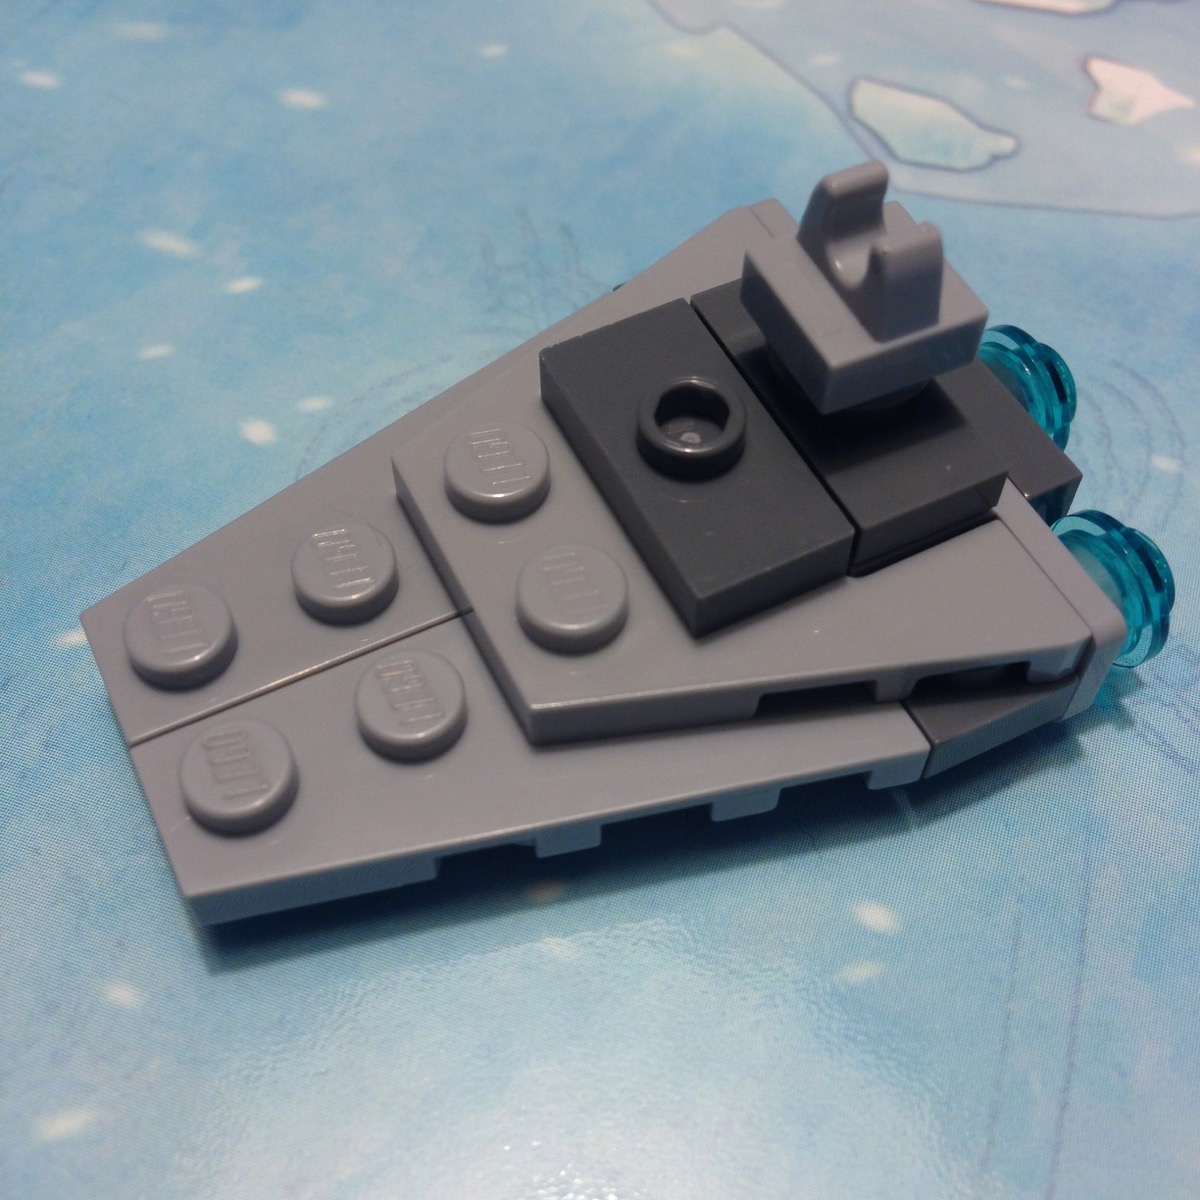 LEGO micro build of an Imperial Star Destroyer mostly in light gray. The 2012 version has three transparent light blue engines at the rear, but the tip is stubby and the bridge tower is not wide enough.